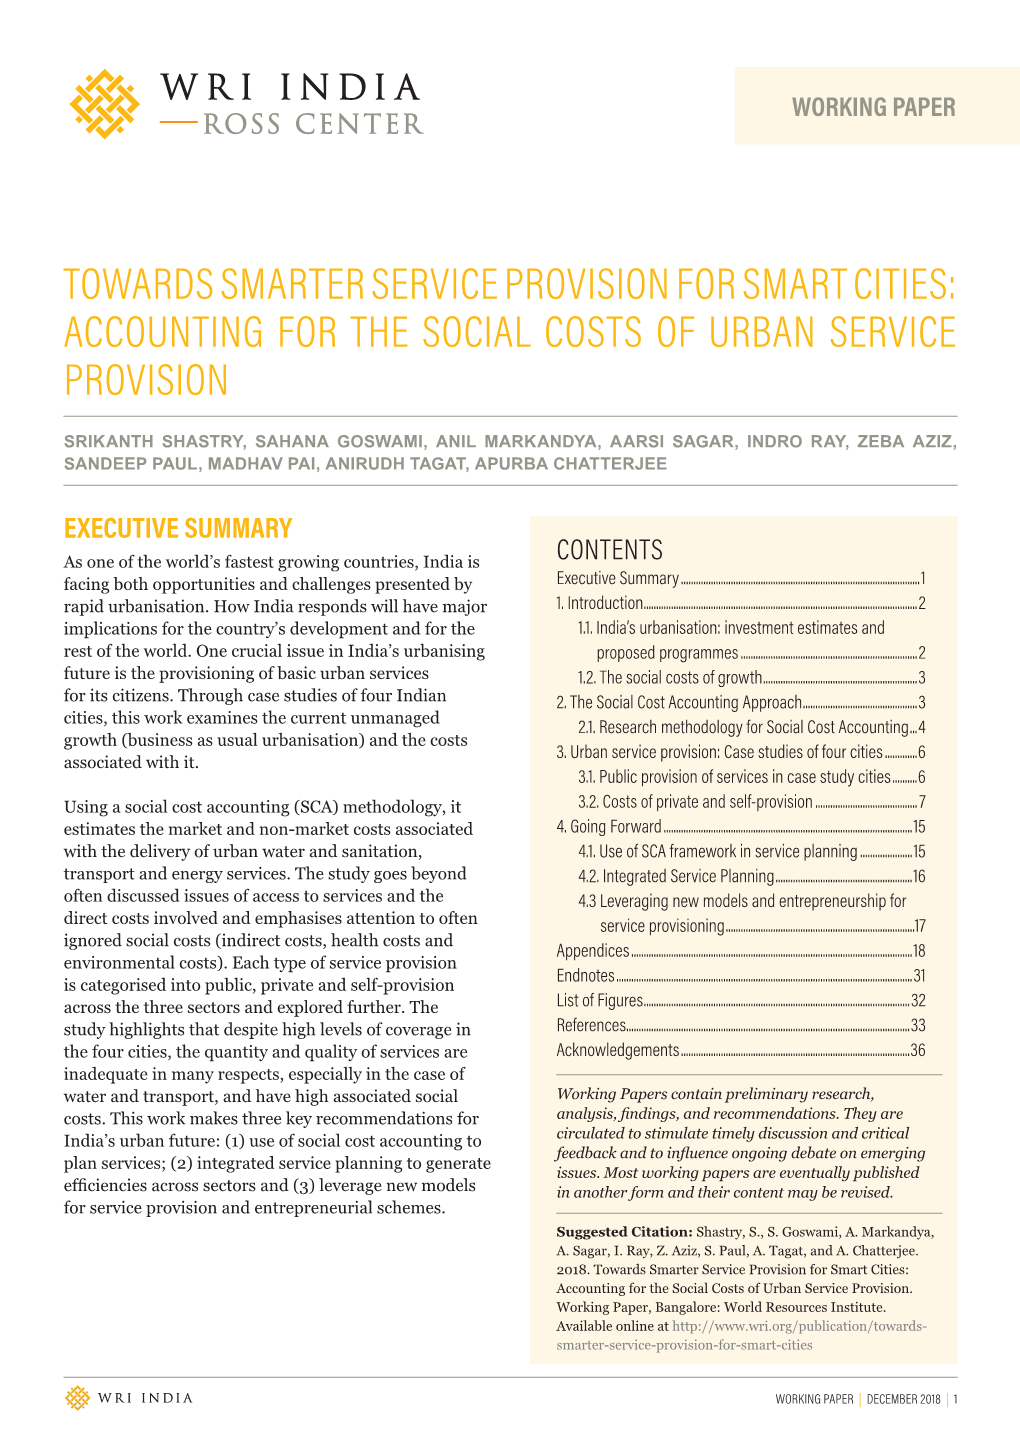 Towards Smarter Service Provision for Smart Cities: Accounting for the Social Costs of Urban Service Provision